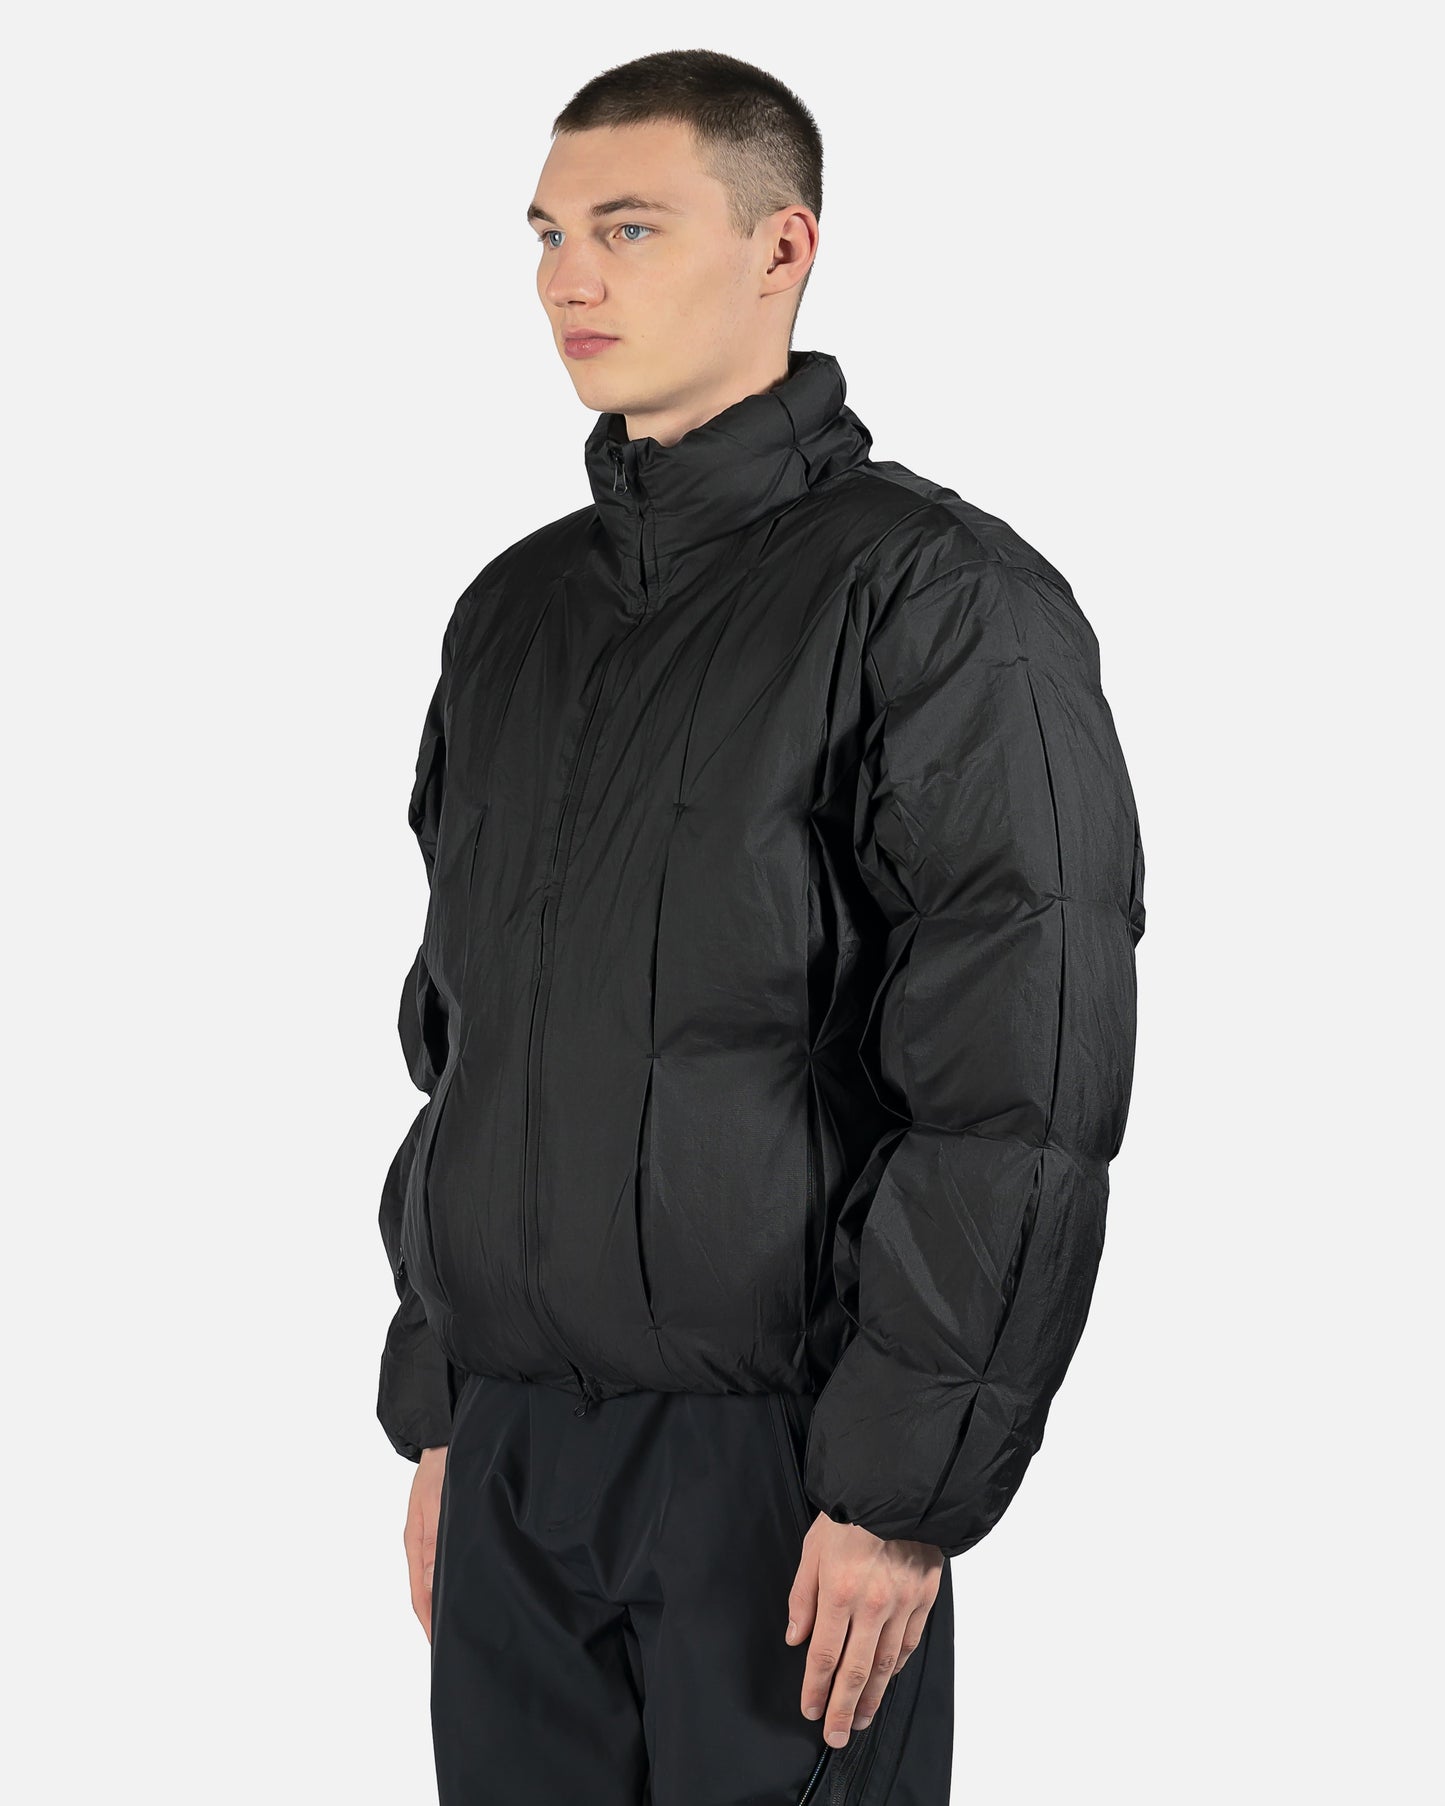 POST ARCHIVE FACTION (P.A.F) Men's Jackets 4.0+ Down Center Puffer Jacket in Black